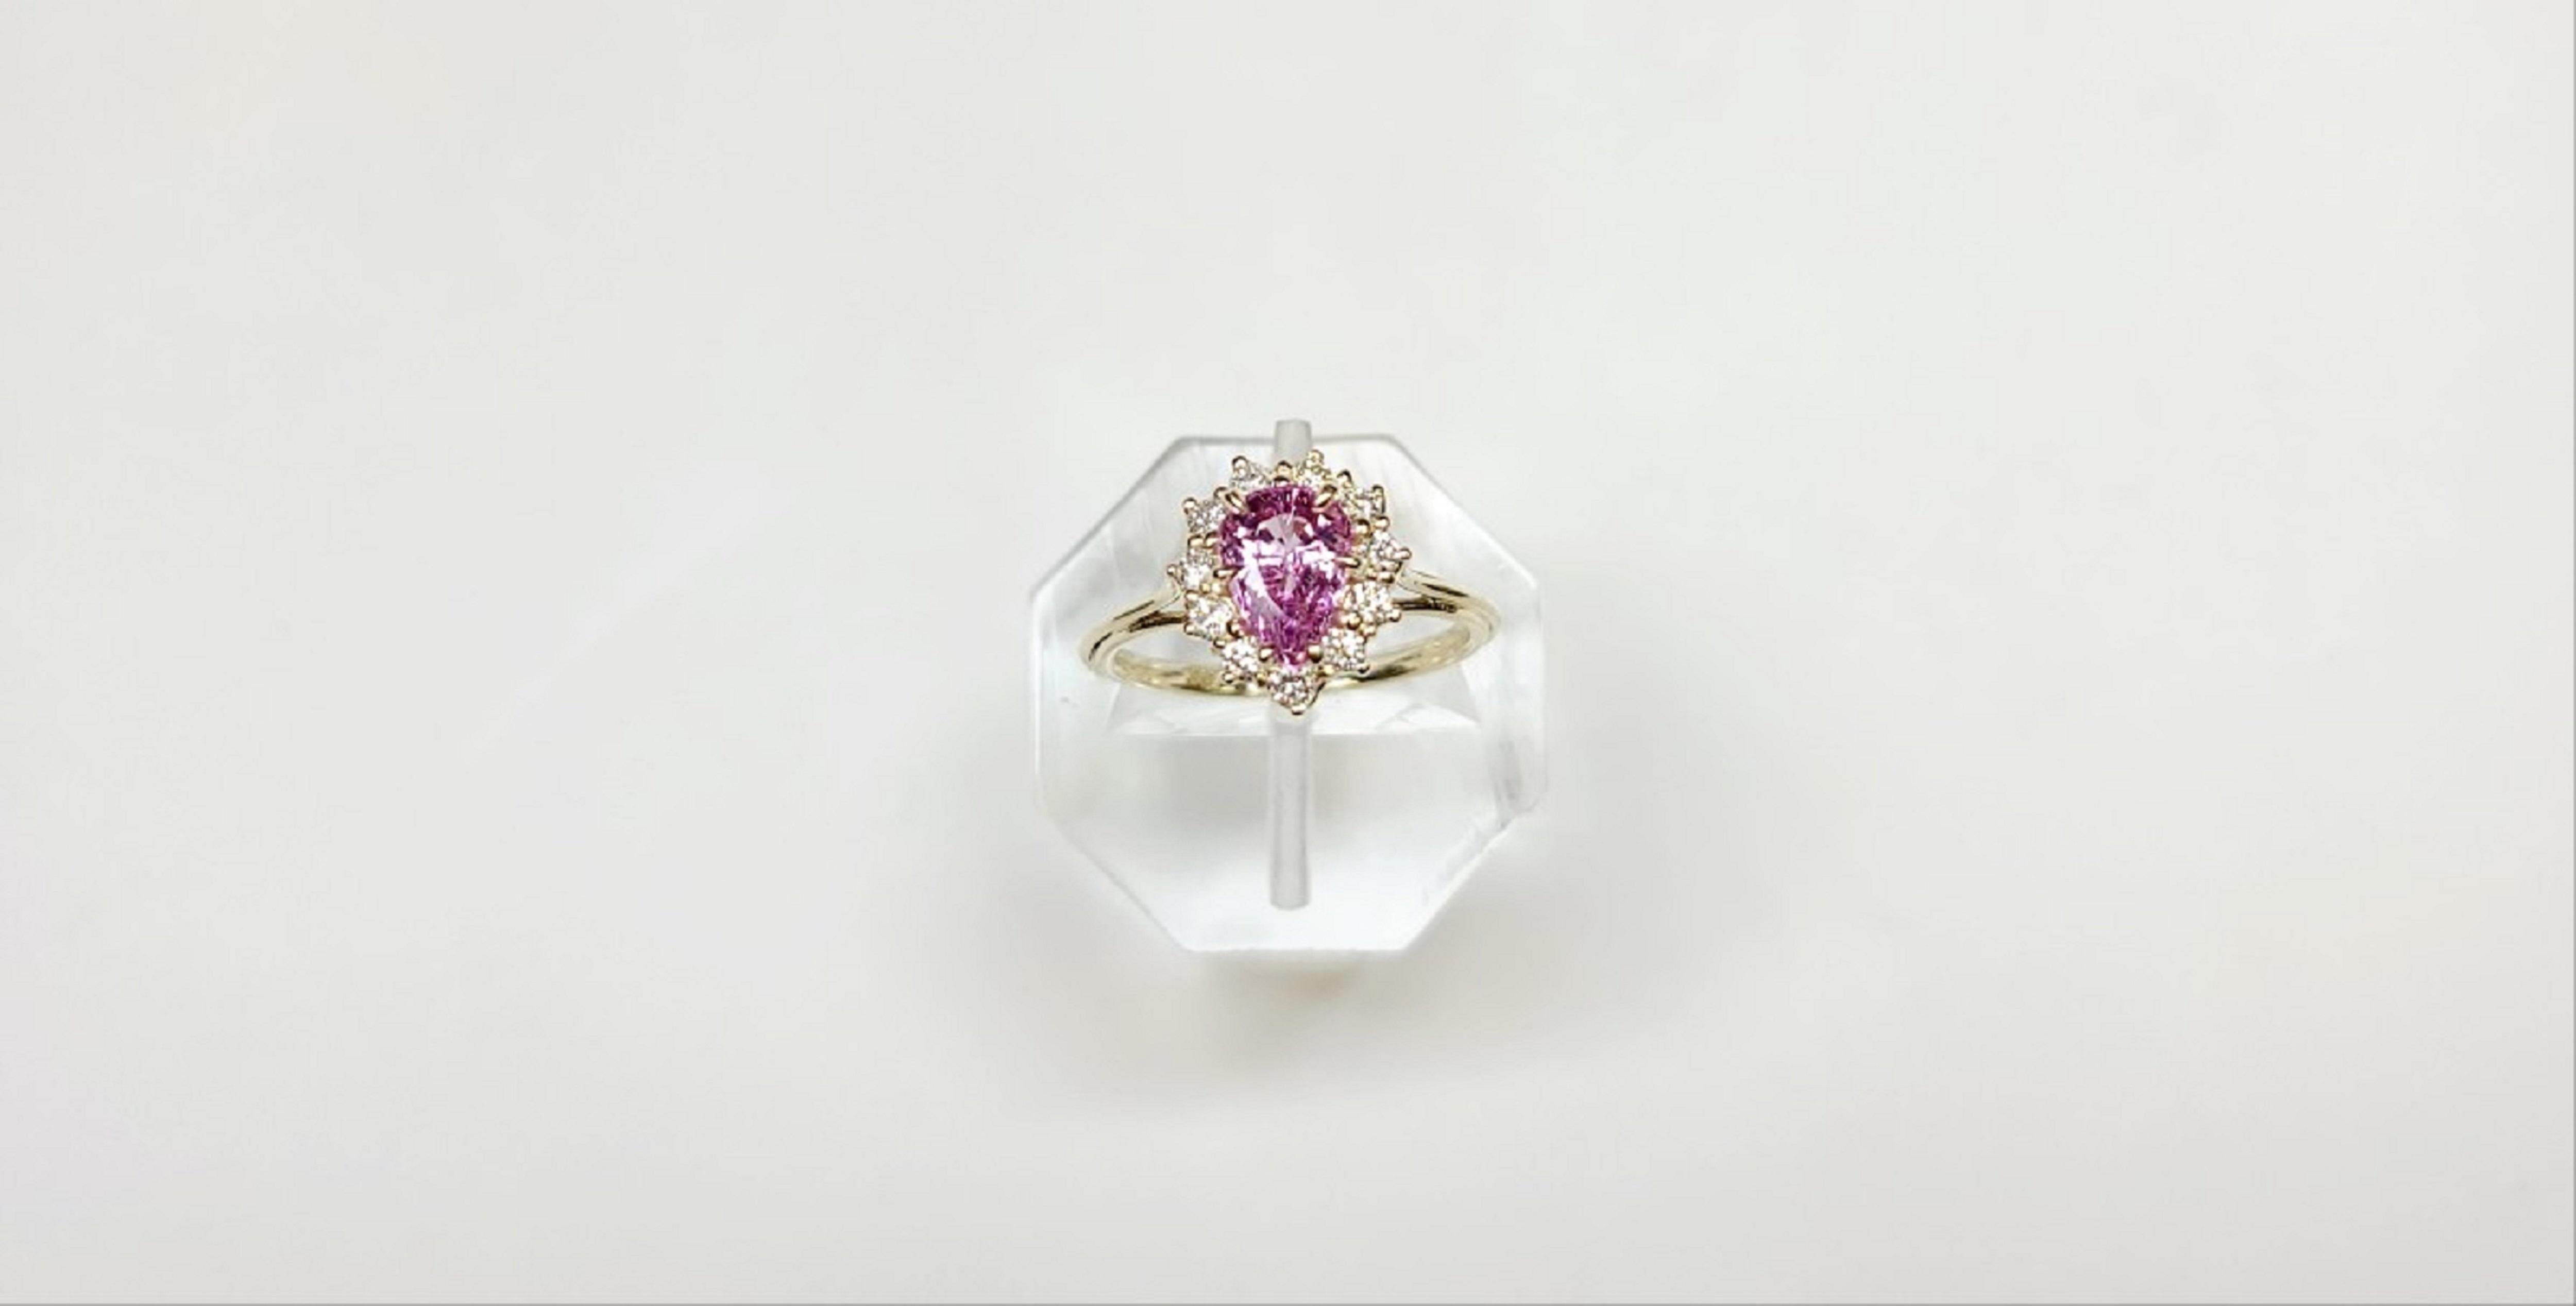 New Cert 1.37 ct Unheated Natural Pink Sapphire Diamond Ring in 14k Gold For Sale 8